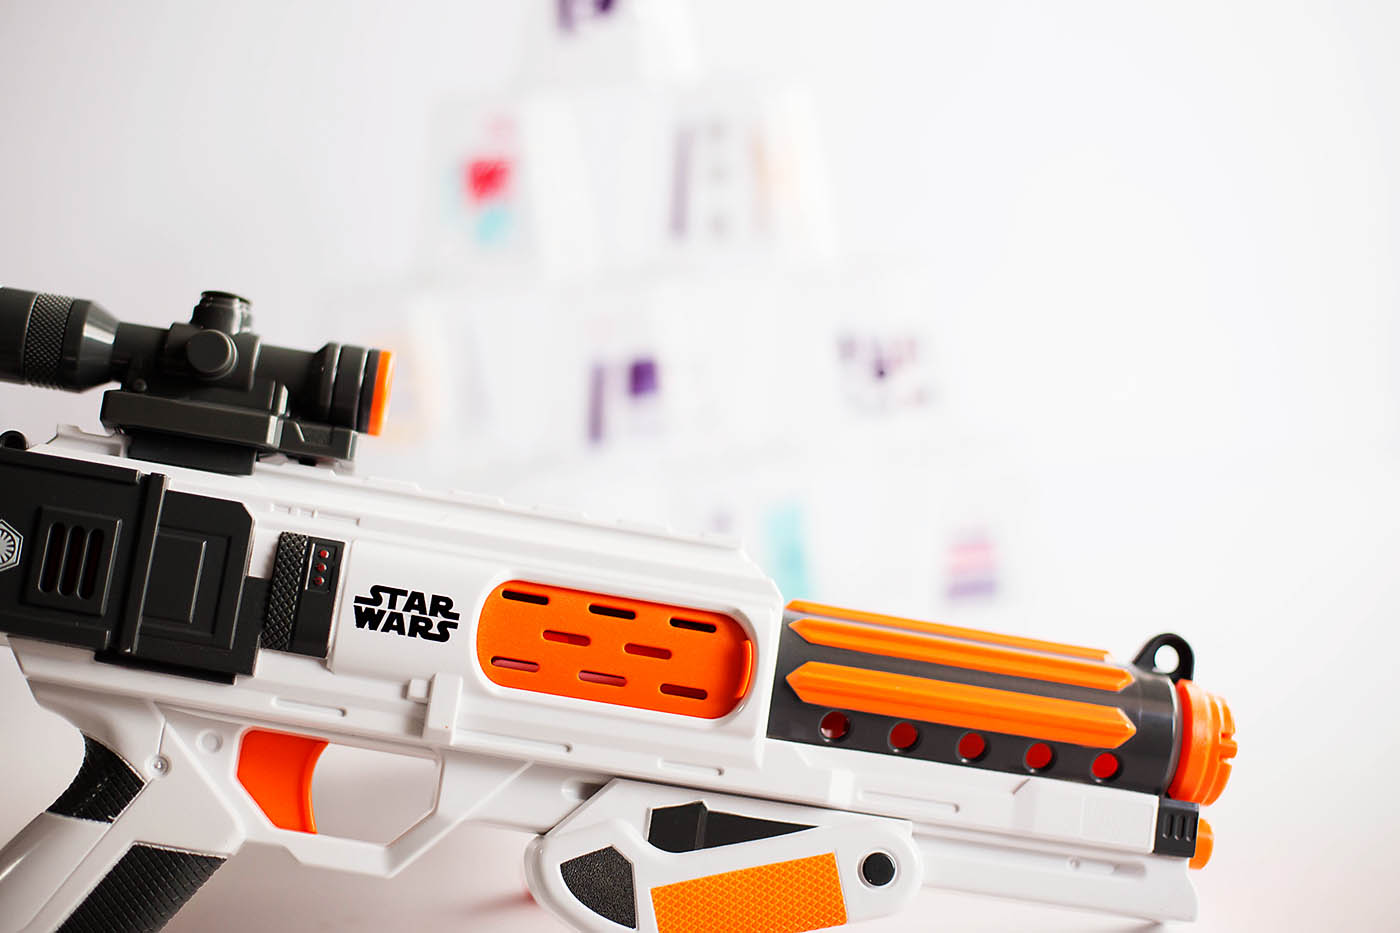 DIY droid targets inspired by Star Wars: The Force Awakens